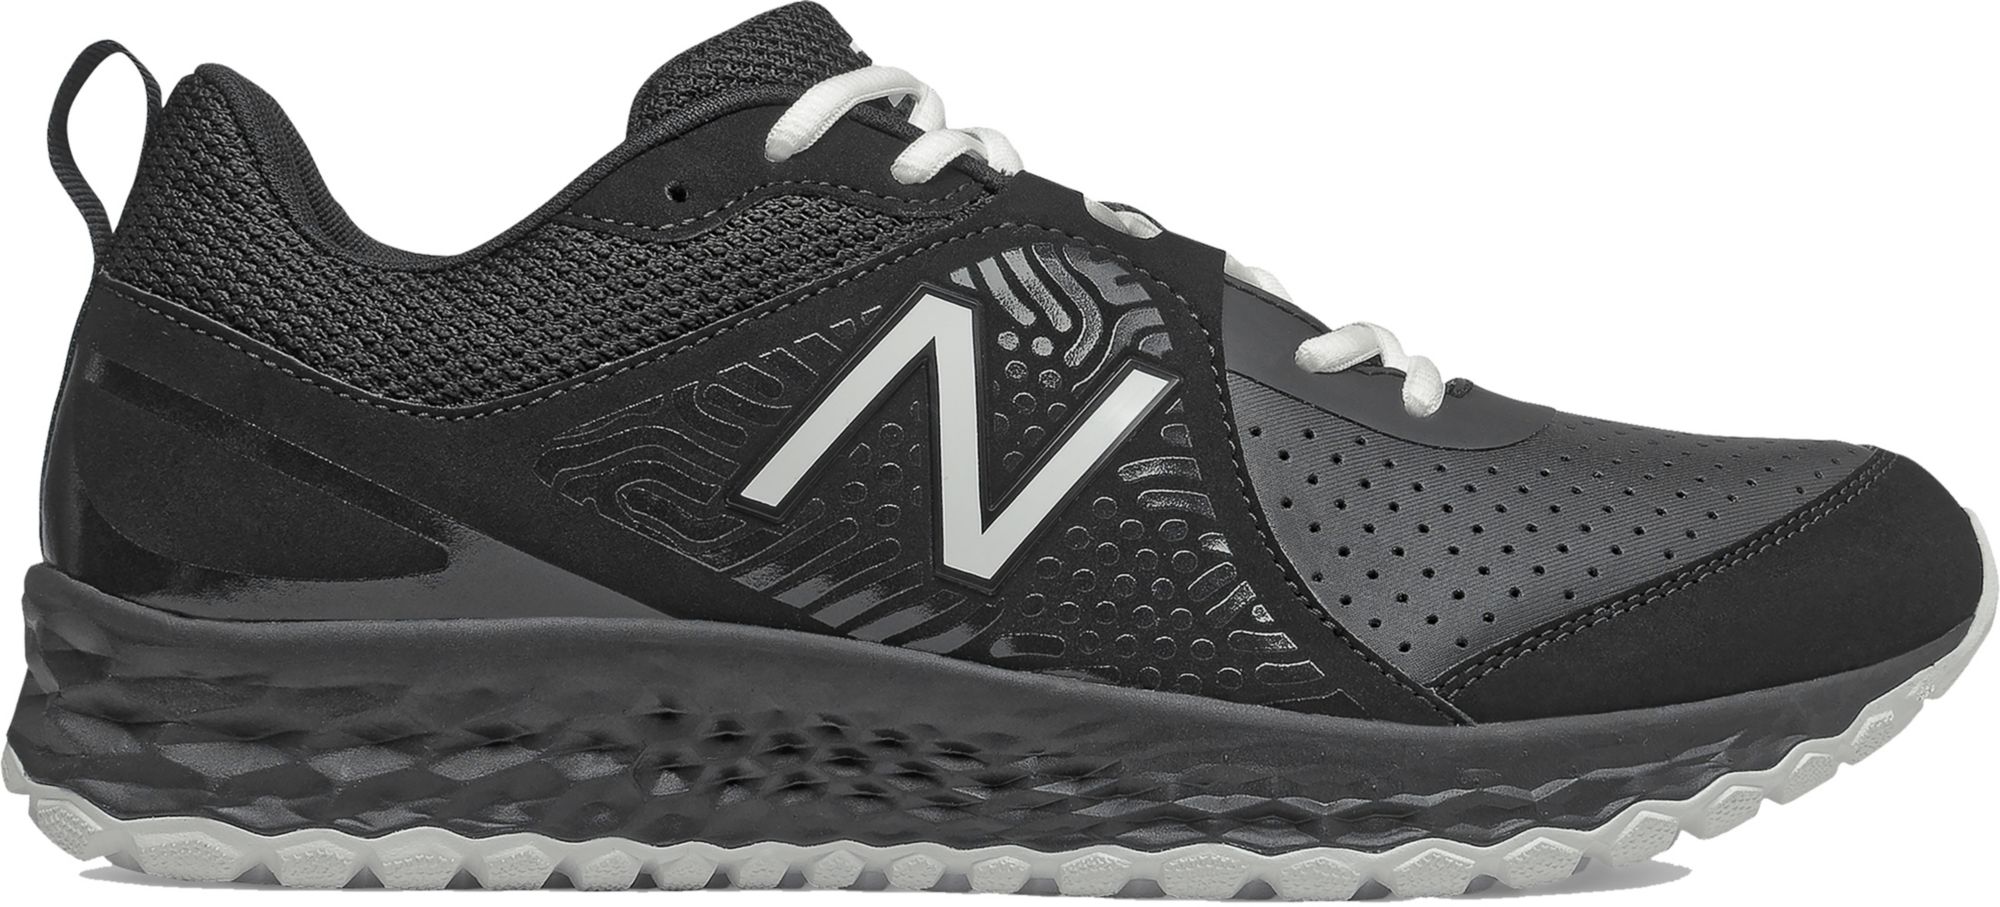 New Balance Shoes | Curbside Pickup 